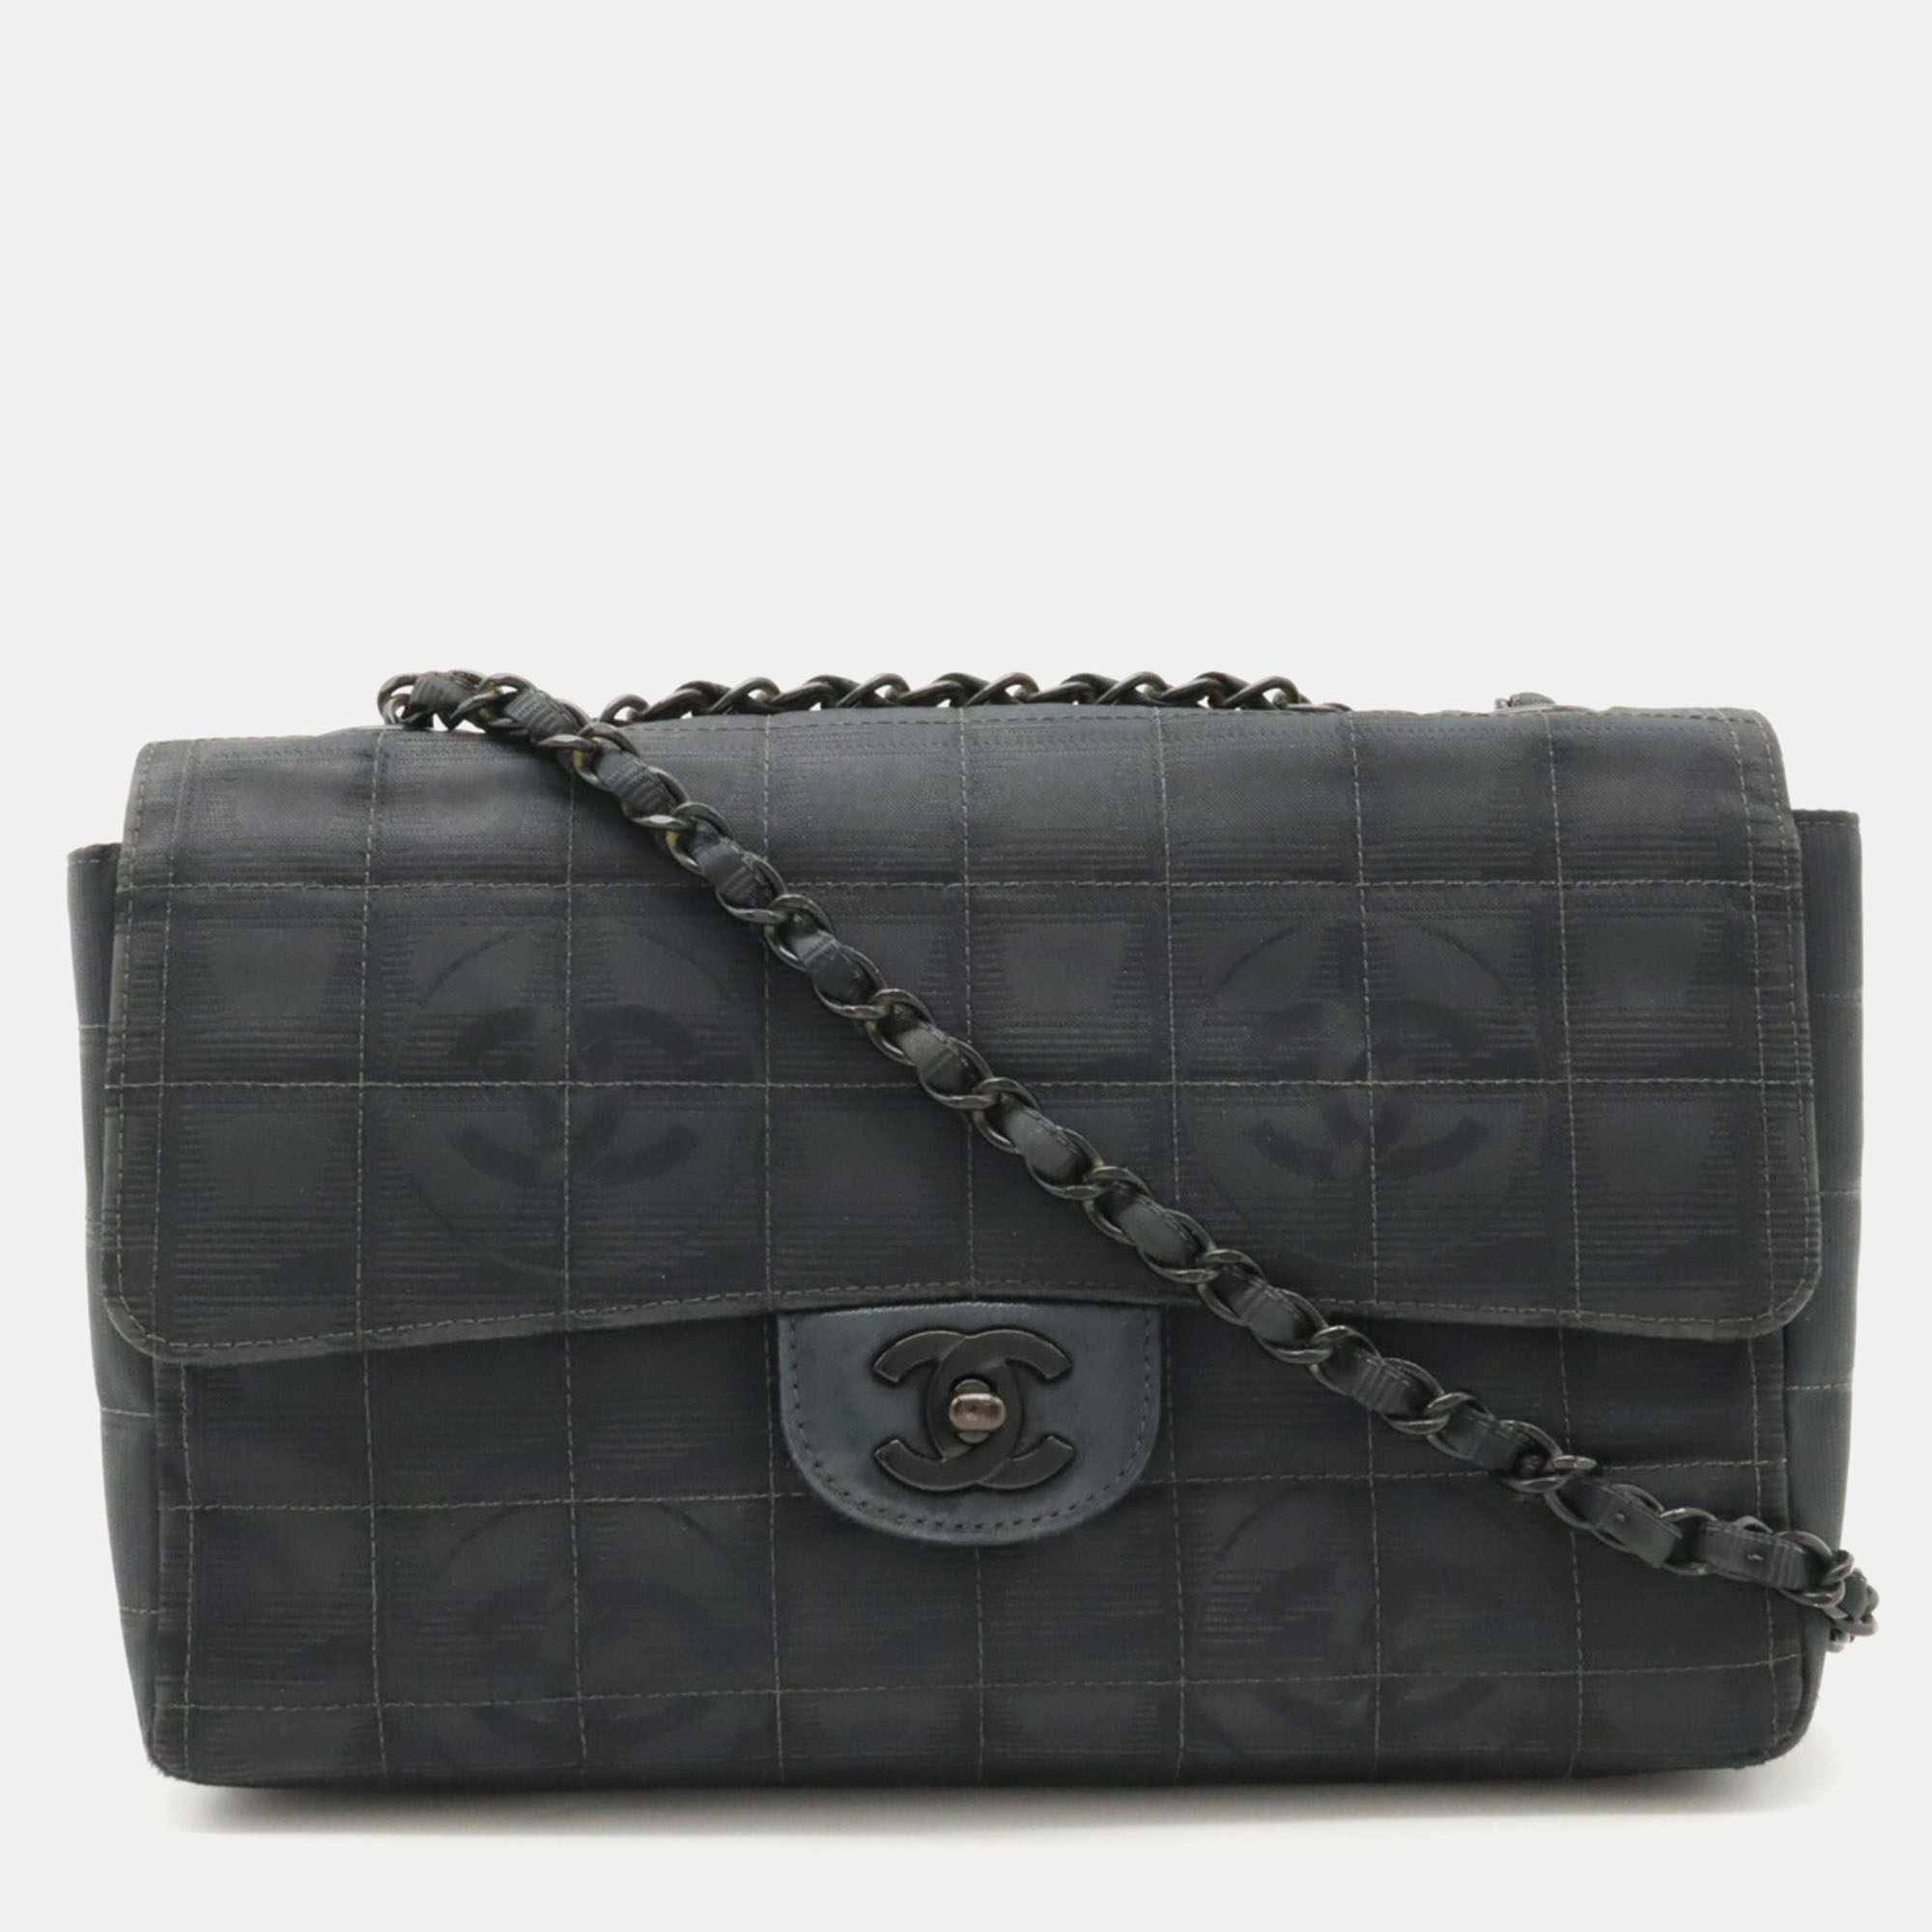 Chanel black choco bar quilted fabric cc travel line shoulder bag